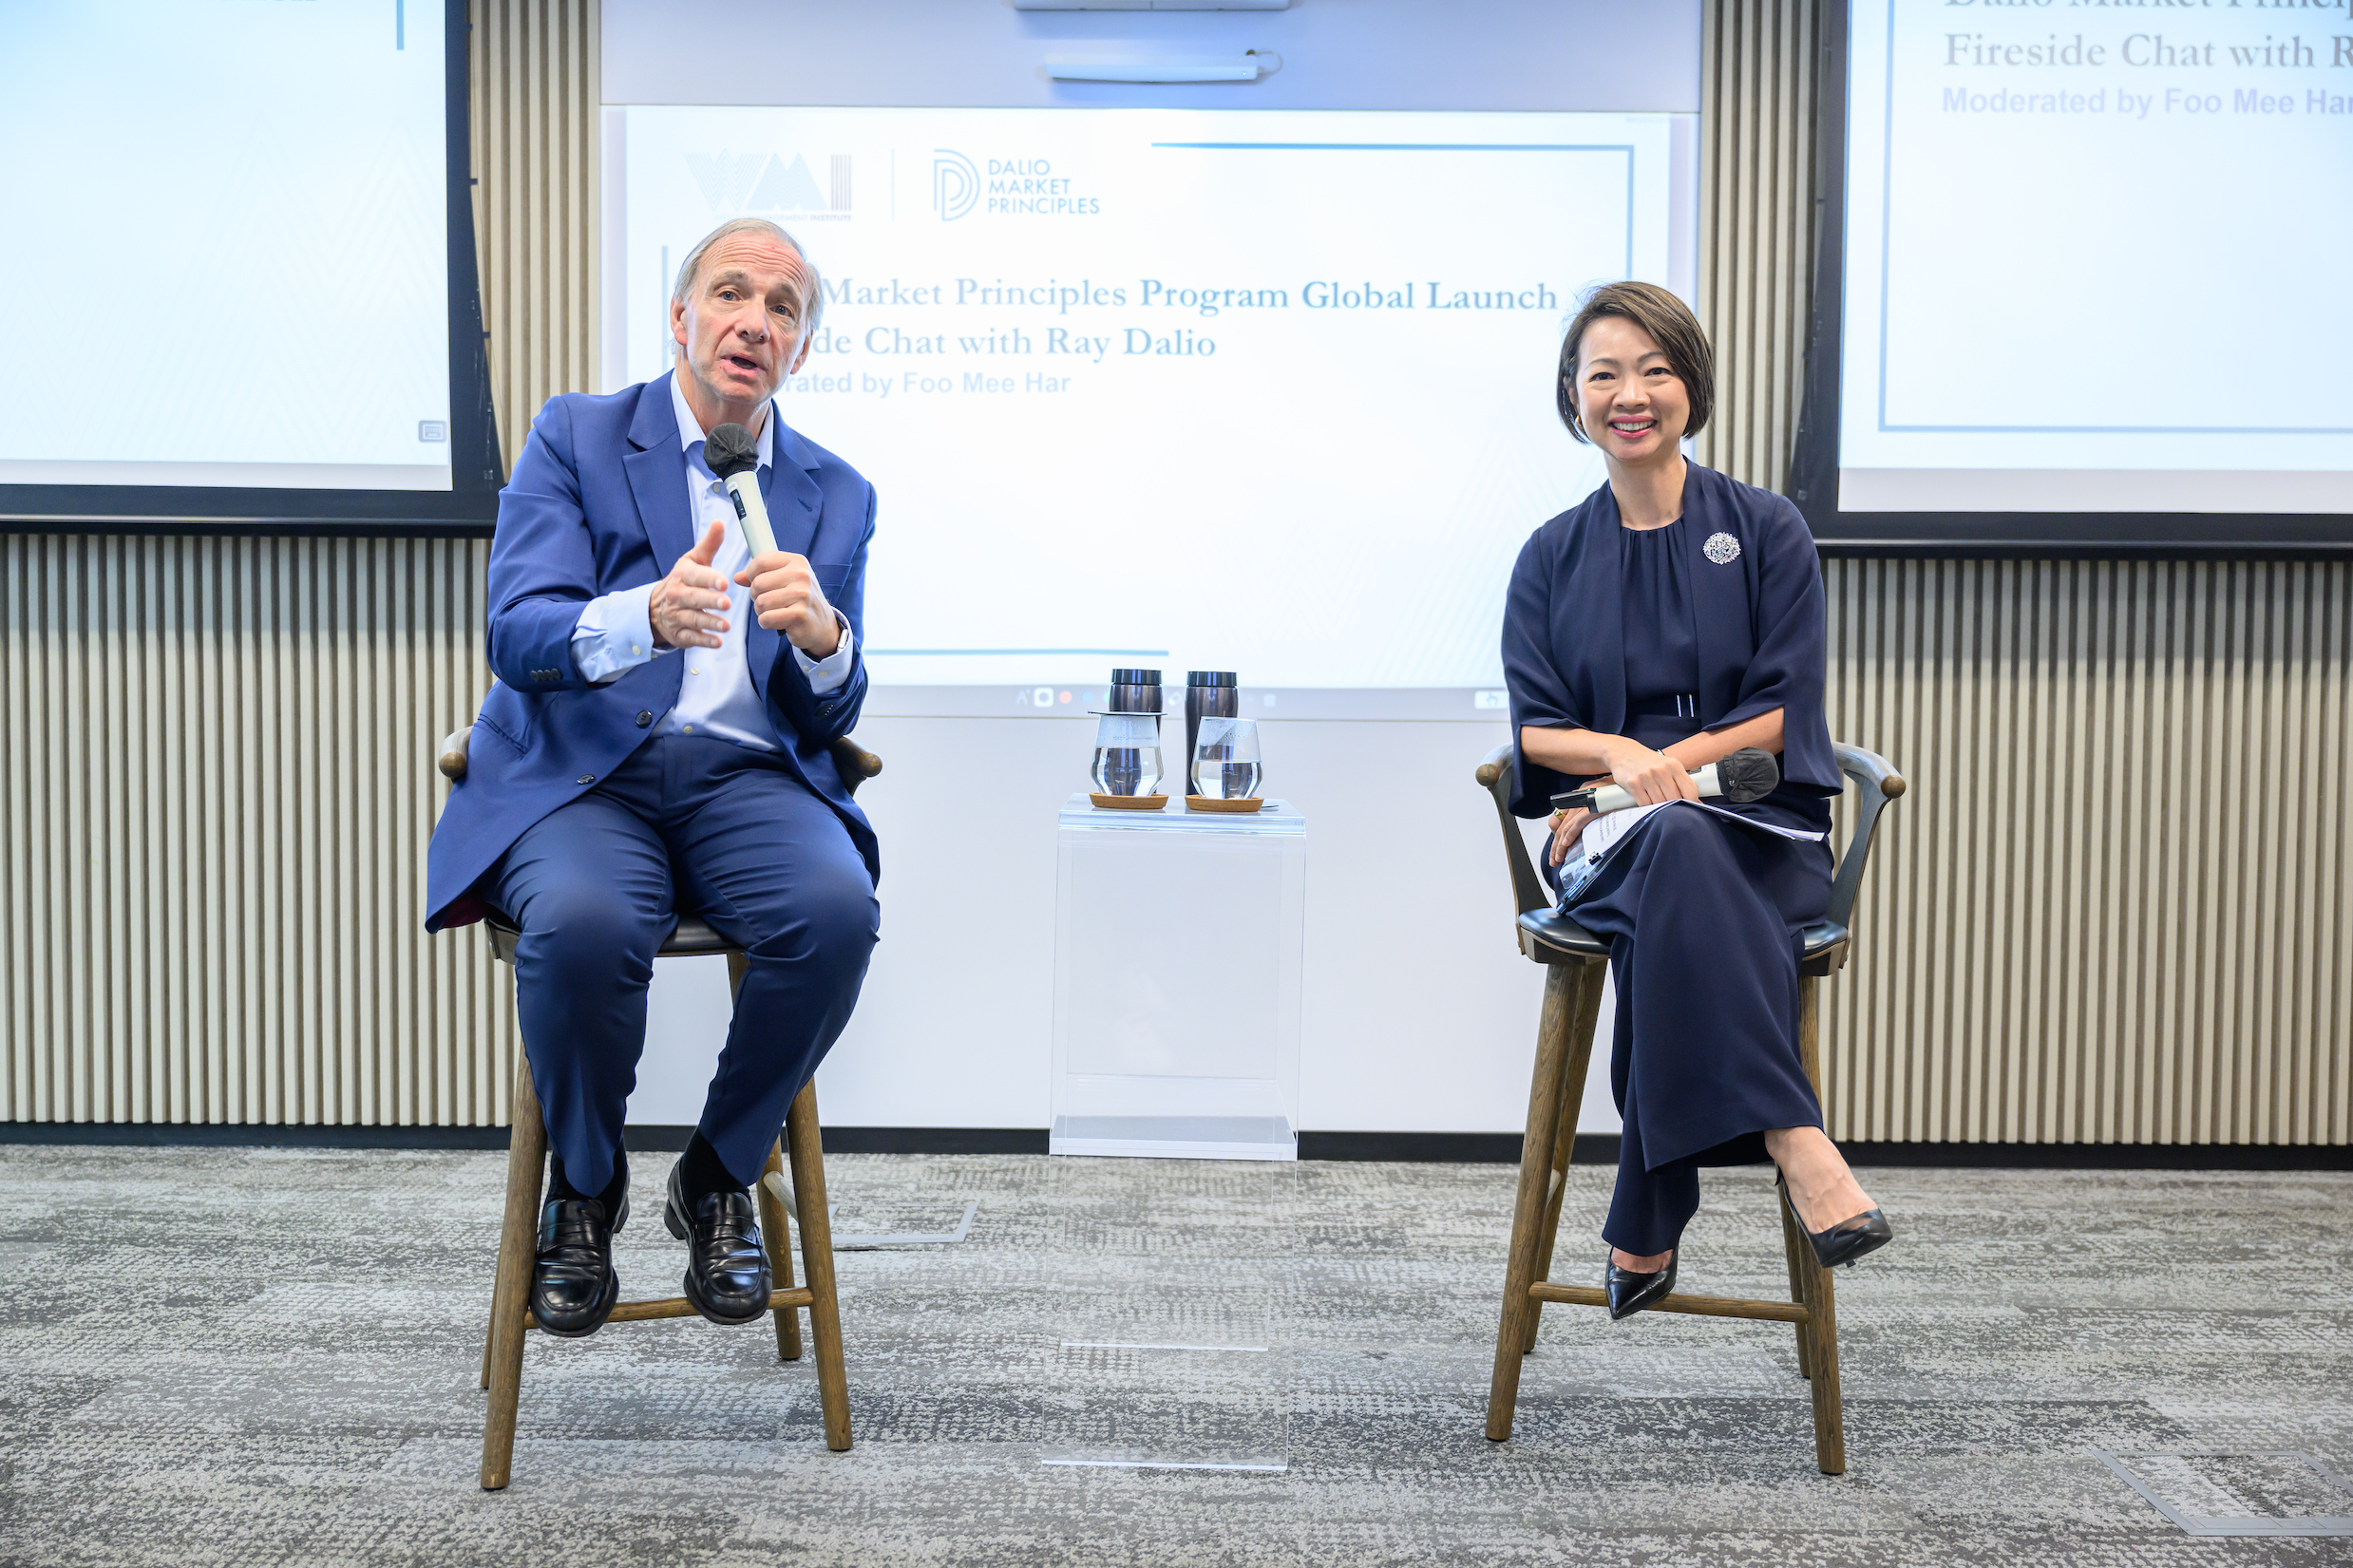 Fireside chat at the Global Launch of the Dalio Market Principles (DMP) Online Program with Ray Dalio, moderated by Foo Mee Har.